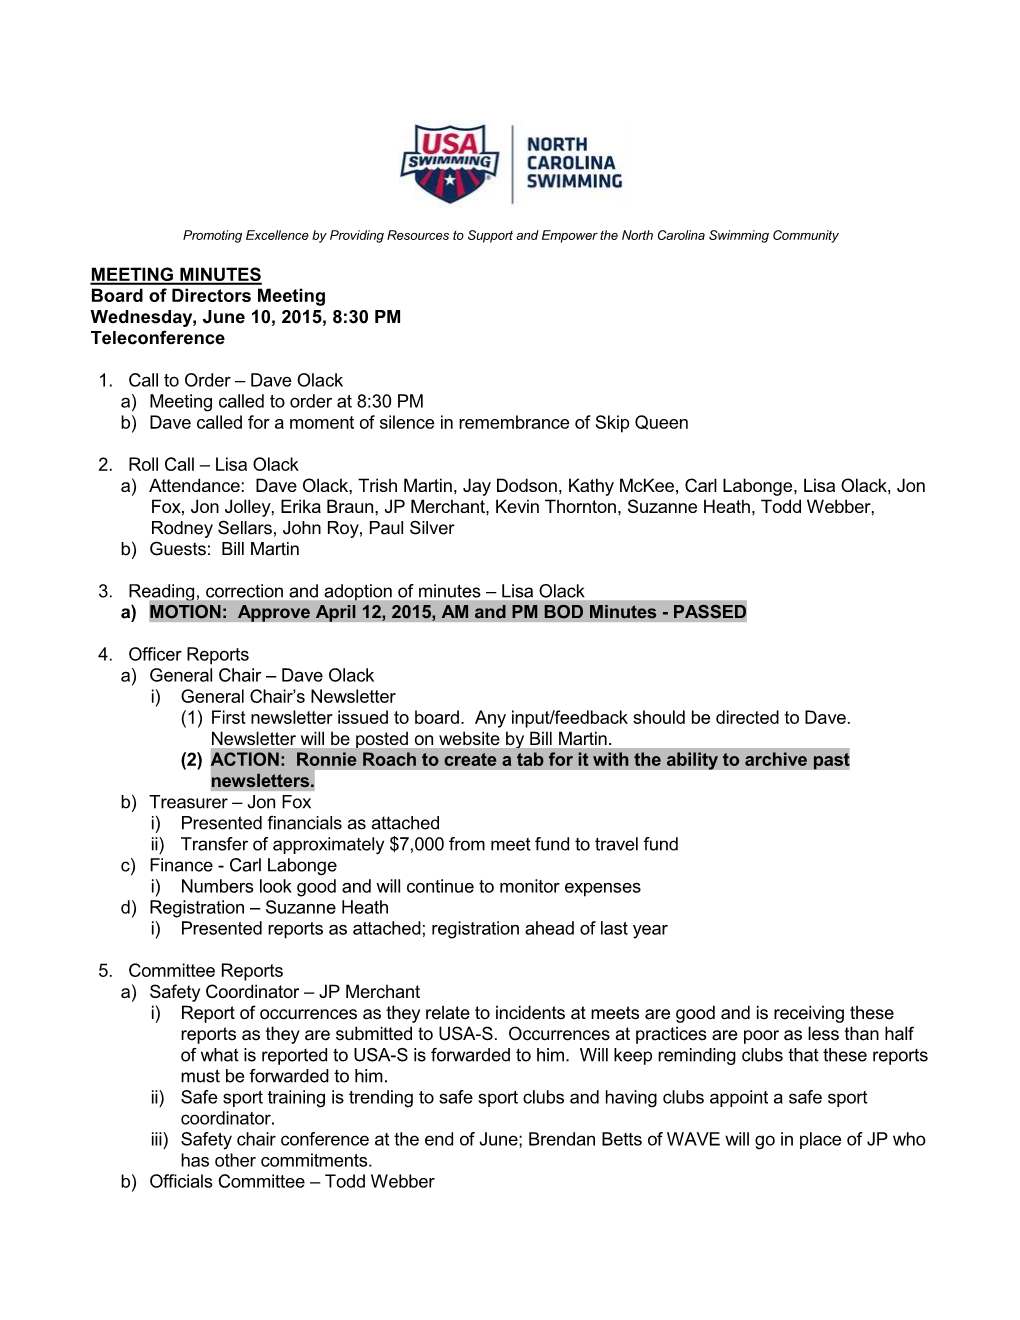 MEETING MINUTES Board of Directors Meeting Wednesday, June 10, 2015, 8:30 PM Teleconference 1. Call to Order – Dave Olack A) M